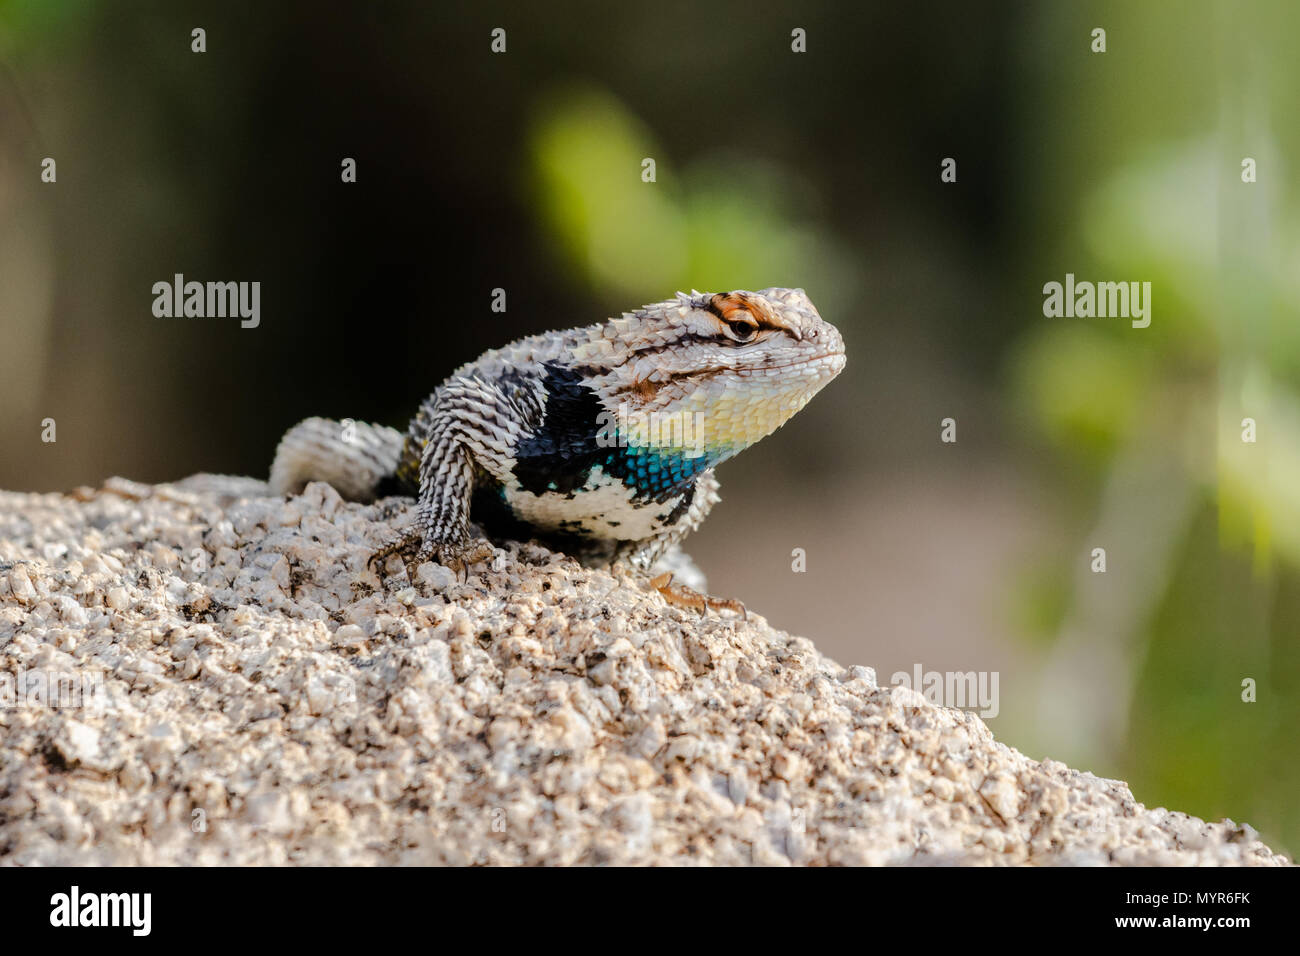 Desert Spiny Lizard (sceloporus magister) on a granite rock, with brightly colored scales, in Arizona's Sonoran desert. Stock Photo